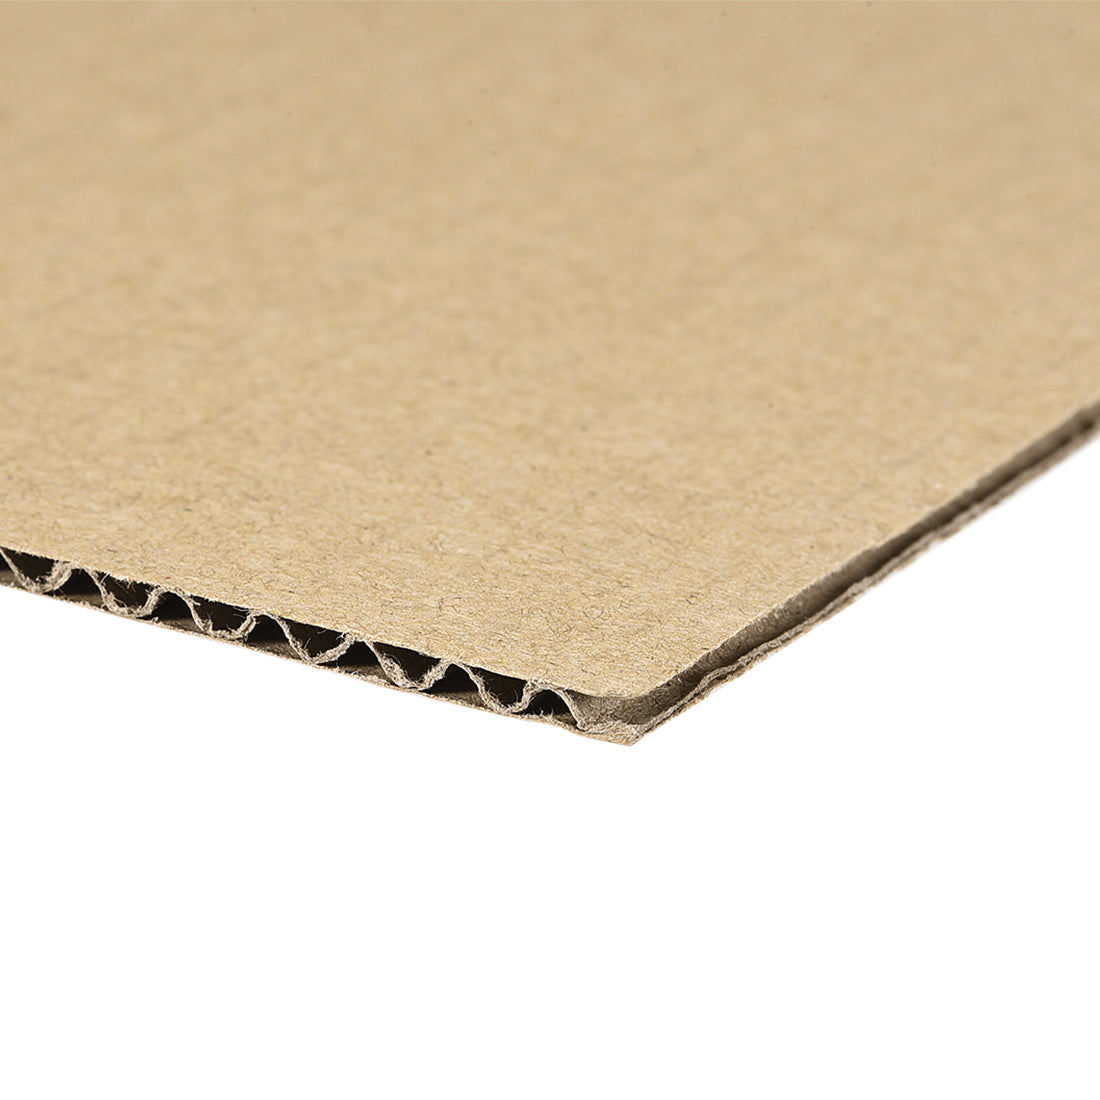 uxcell Uxcell Corrugated Cardboard Filler Insert Sheet Pads 3-Layer 3mm x 10 x 10-Inch 4pcs